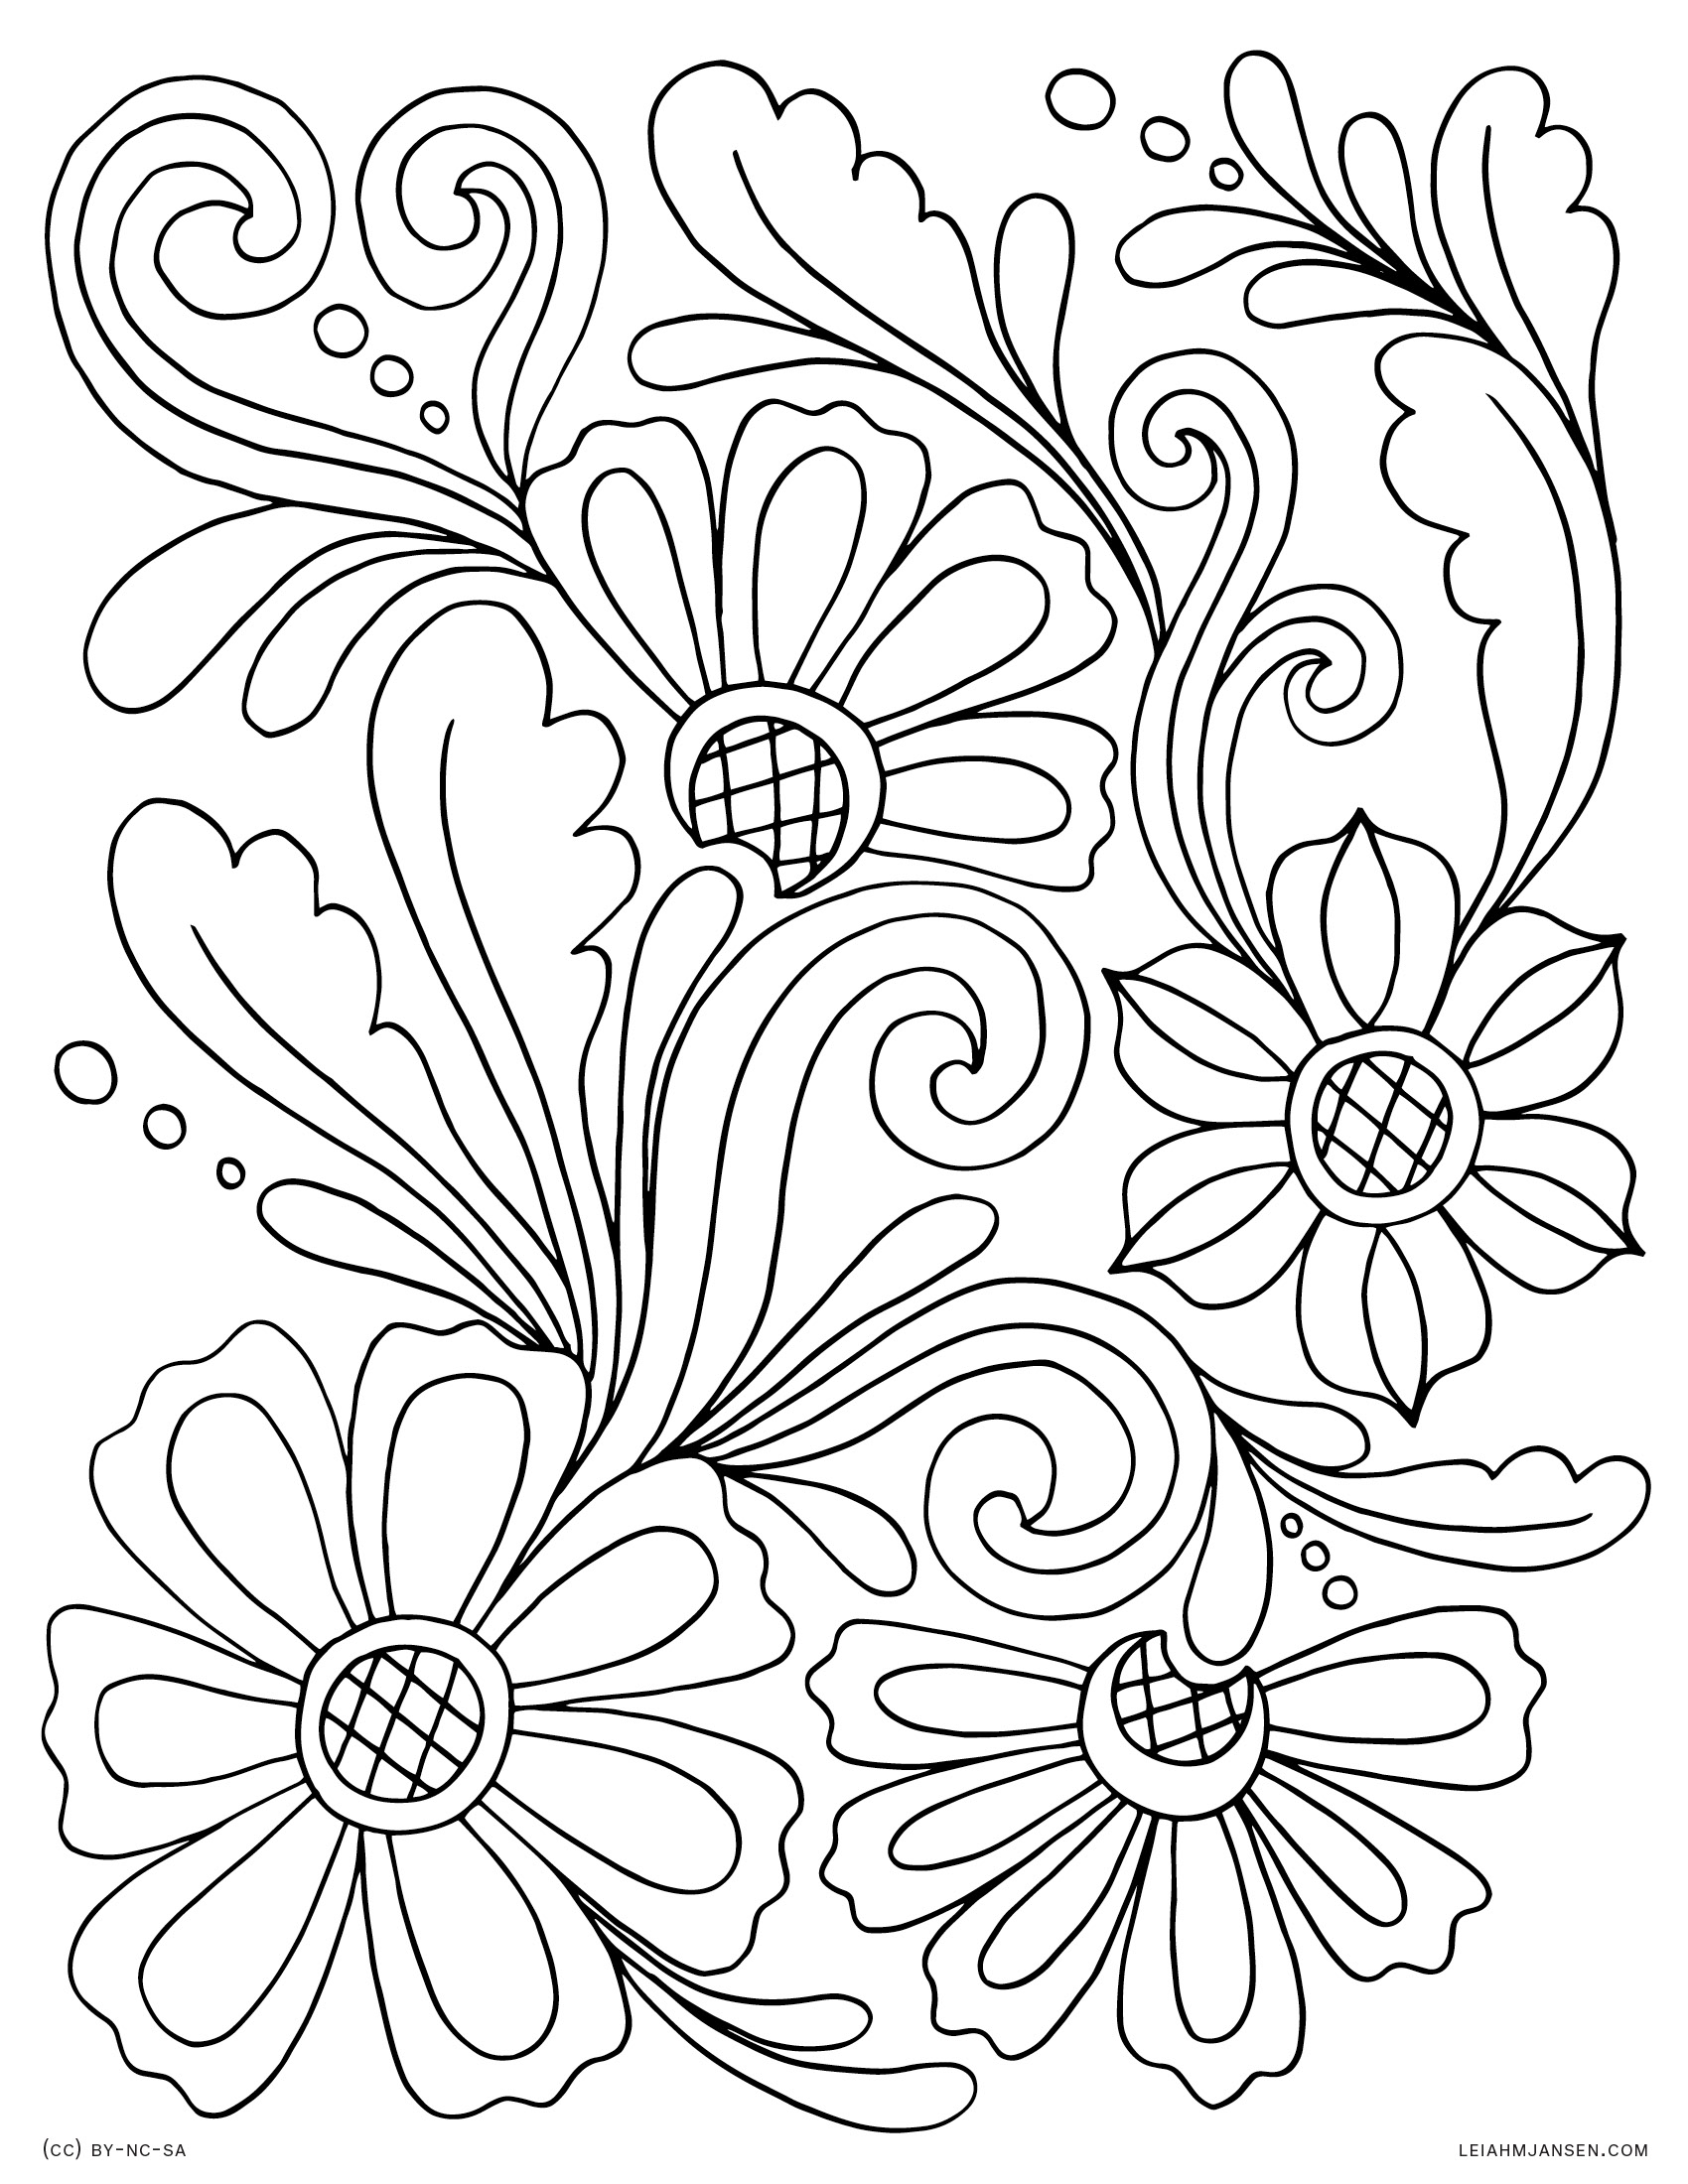 The BEST Earth Day Coloring Pages